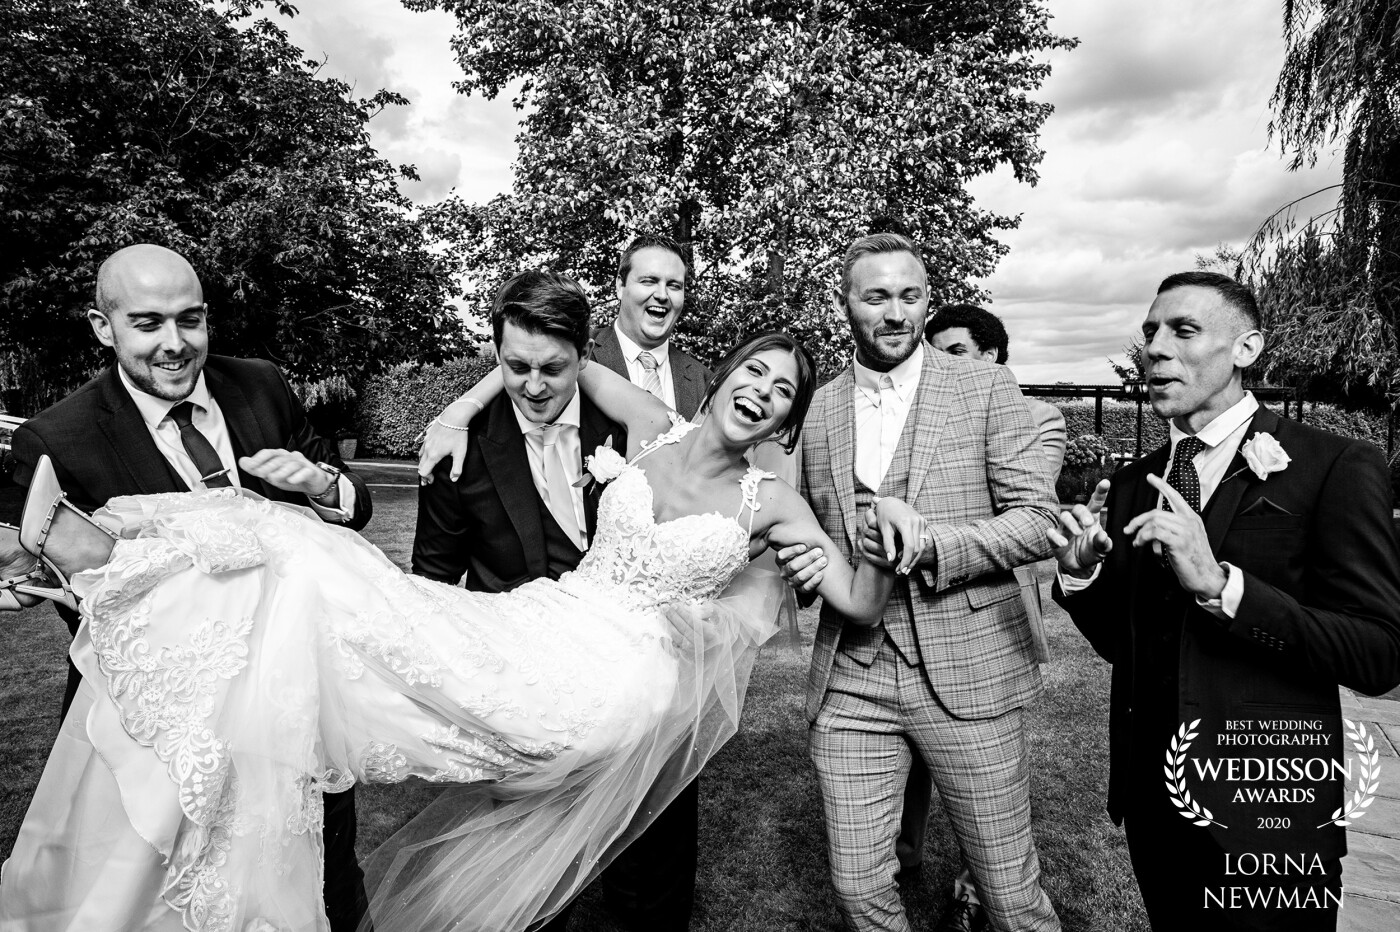 Love this natural moment when beautiful Antonella got kidnapped by the groom and his best men on their wedding day, I think the plan was to throw her into the swimming pool to cool down (it was a scorcher). It was a beautiful day surrounded by lovely people.